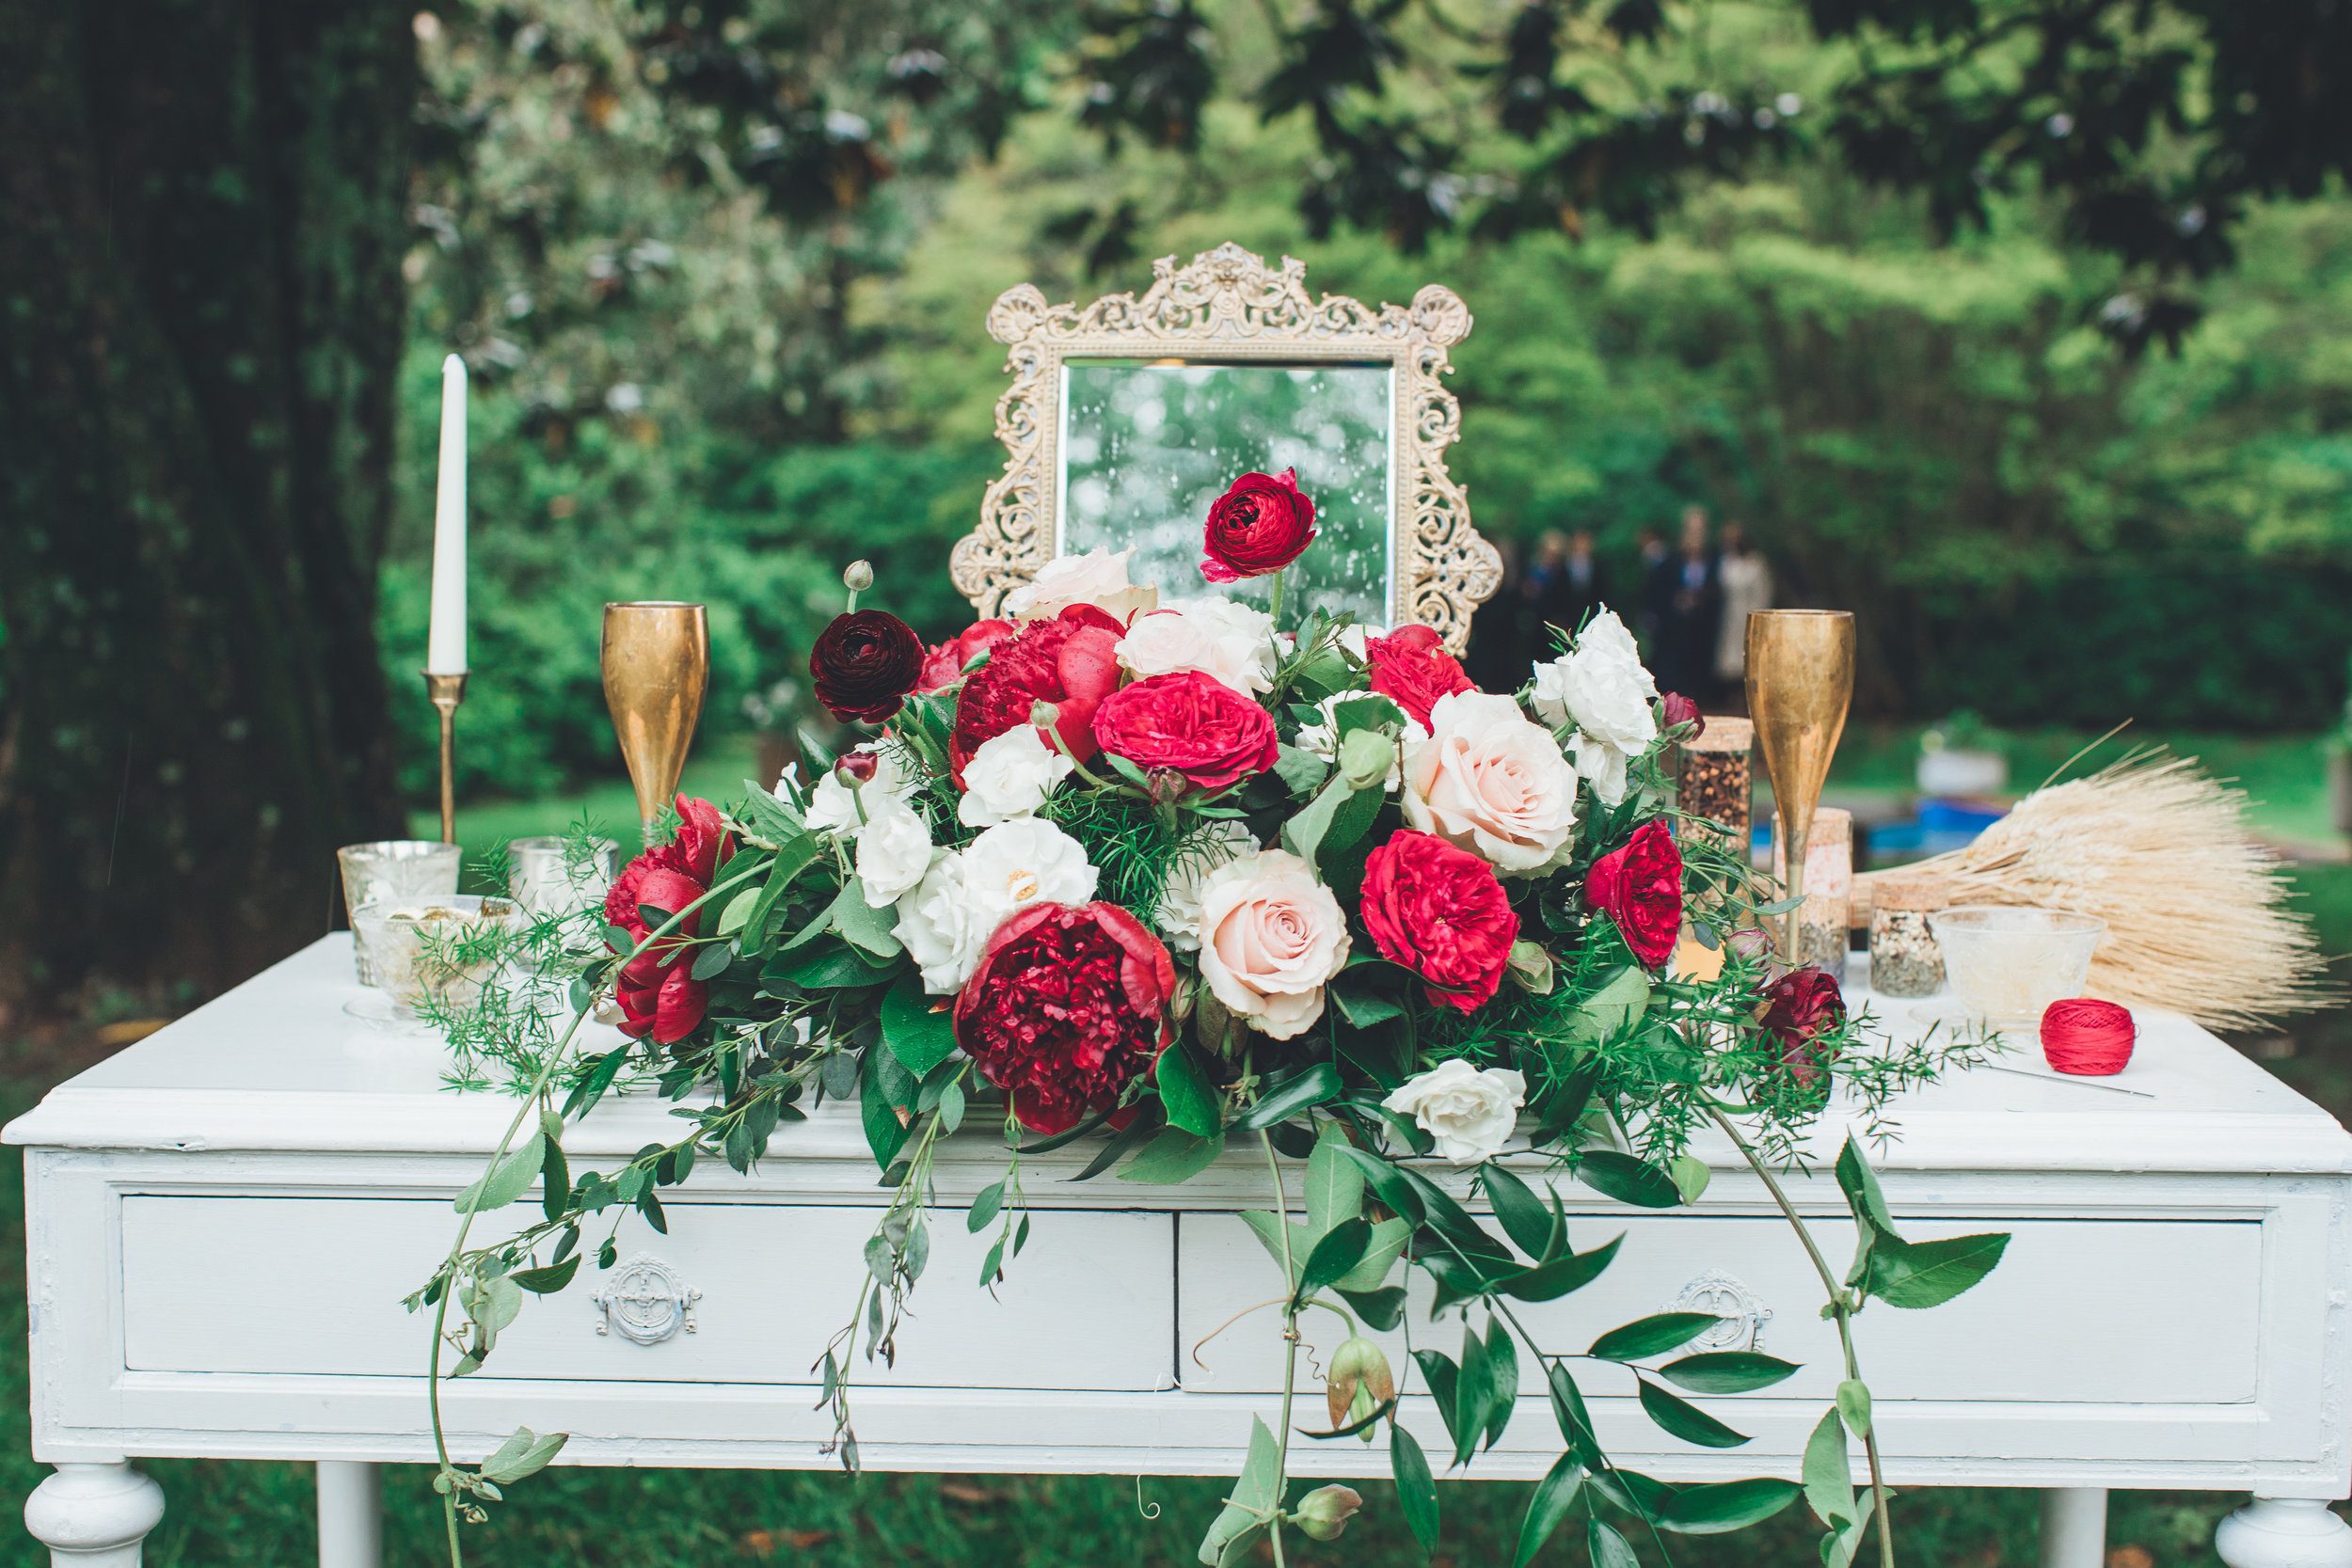 Image by Bow Tie Photo. This altar design, from Morven Park, in Leesburg, Virginia can be repurposed for a sweetheart table.